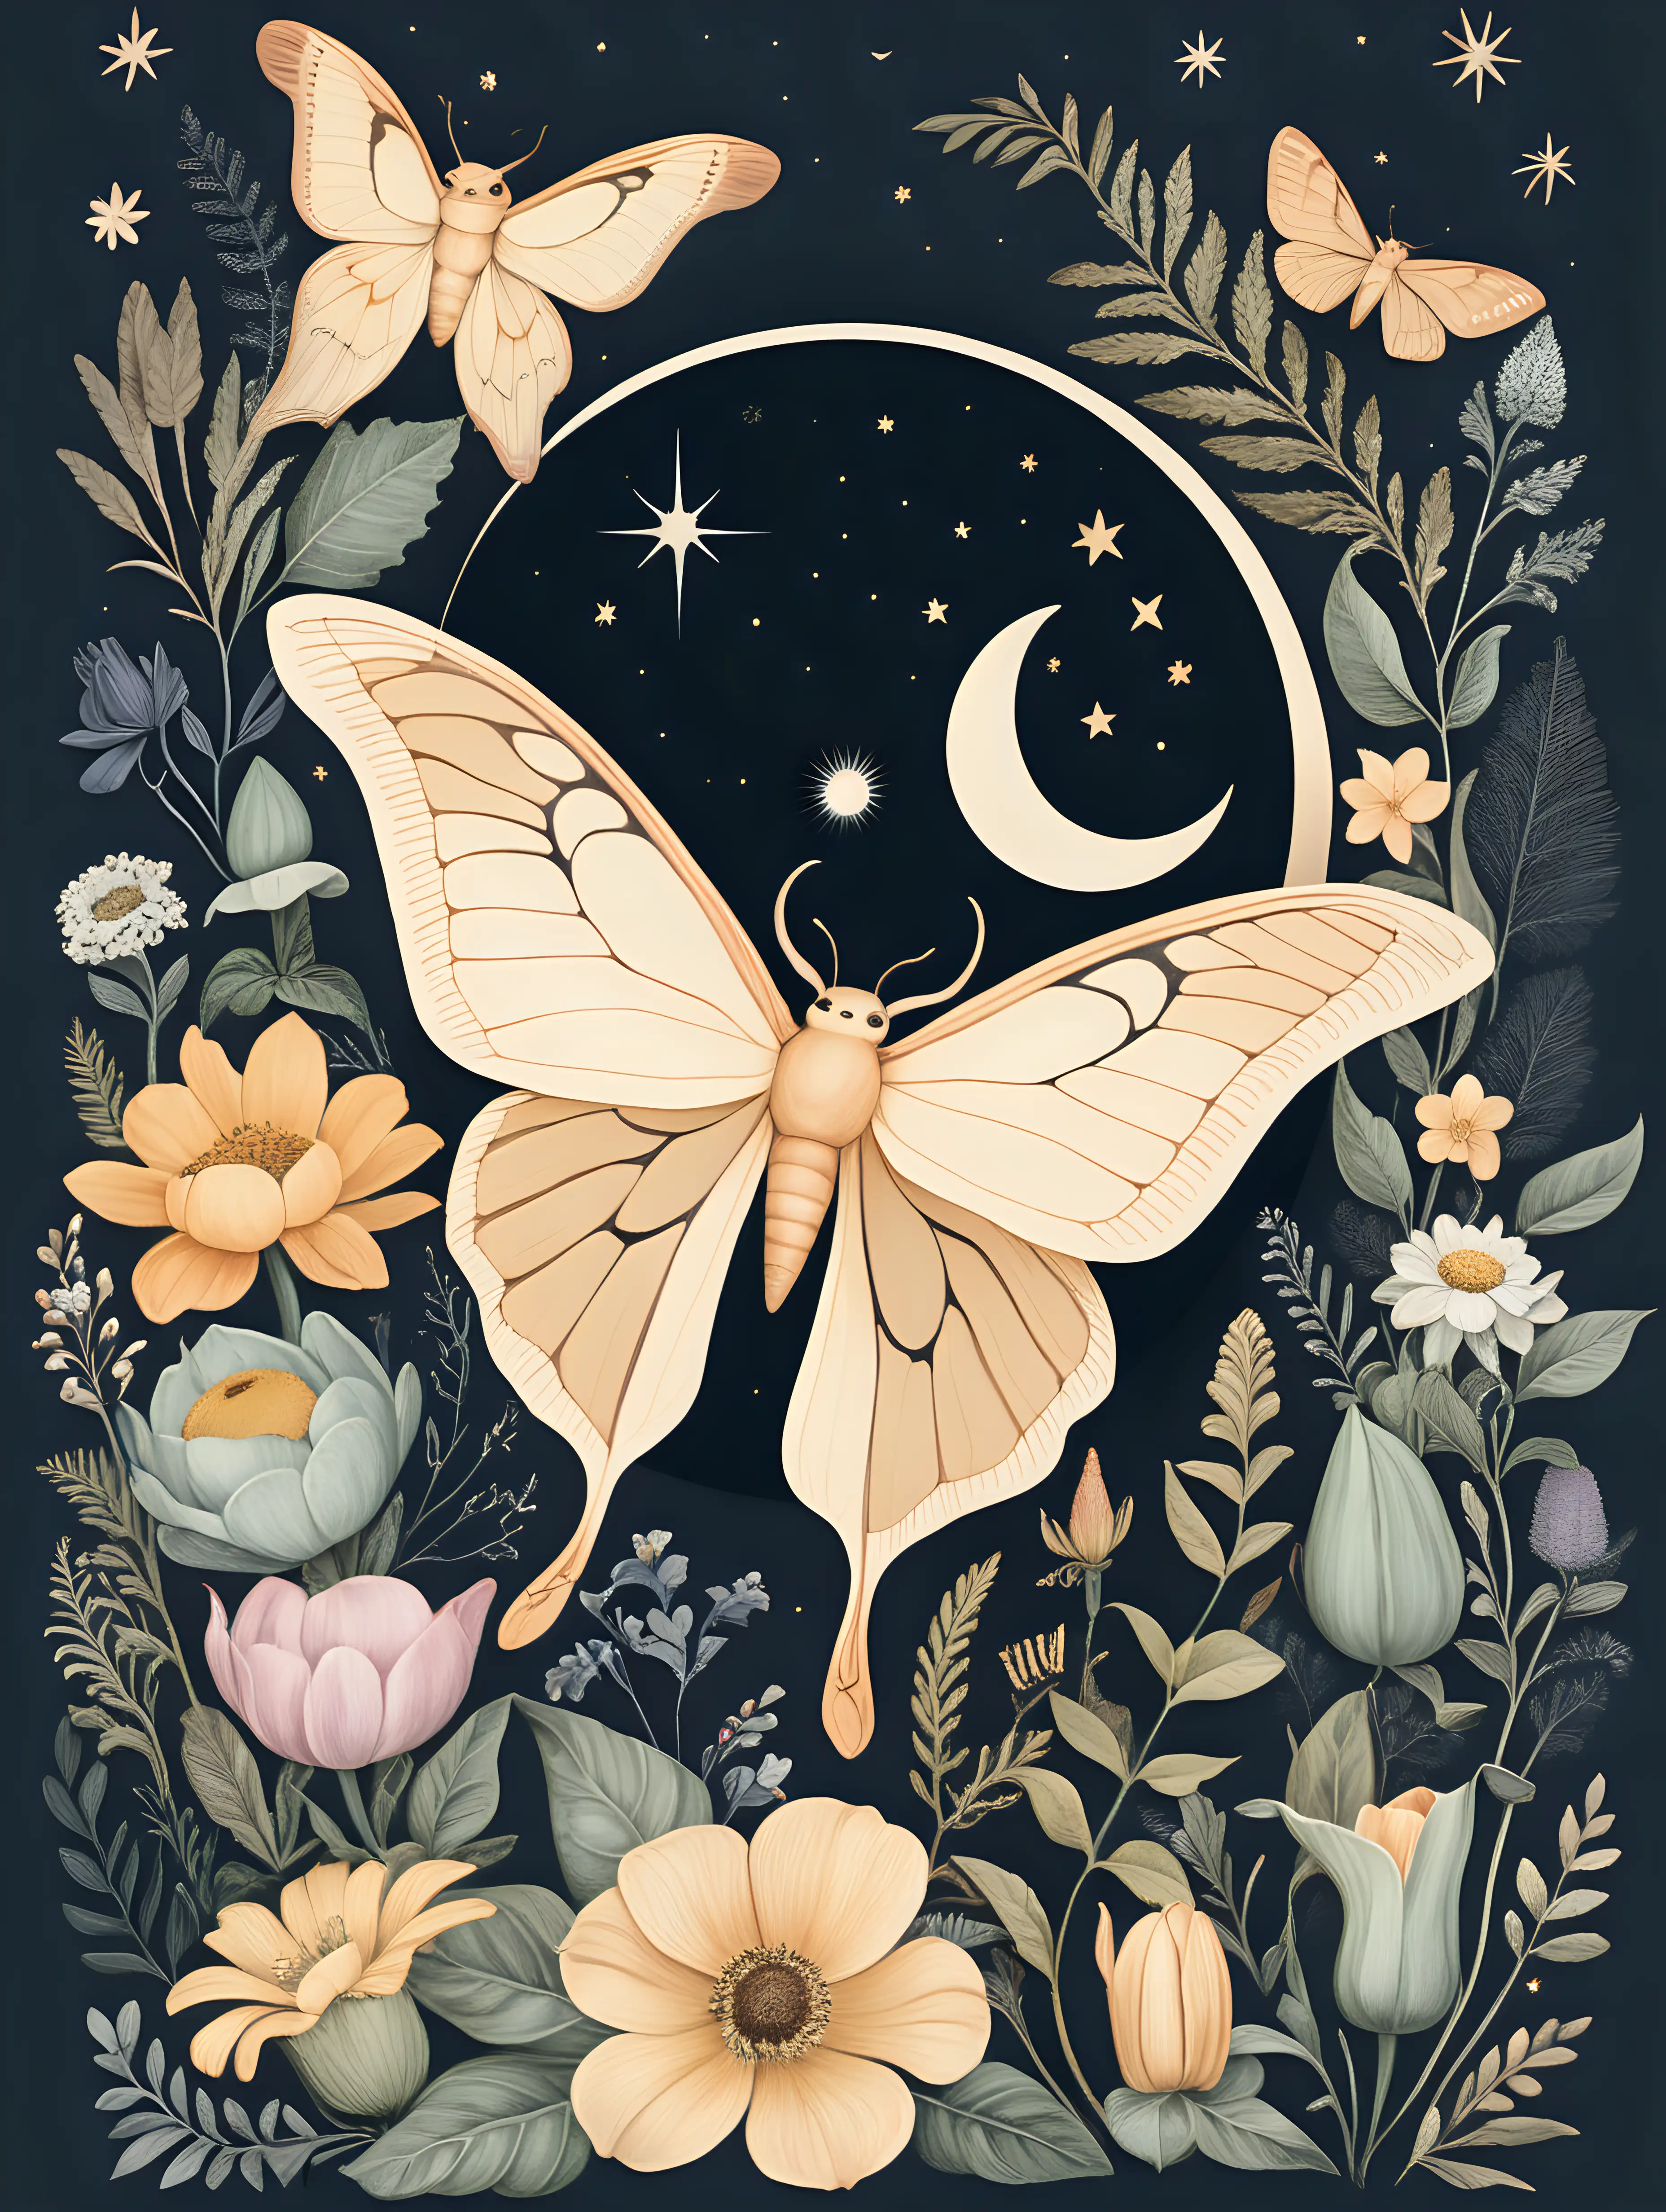 Illustrate total Solar eclipse with Cottagecore aesthetic 
Florals and animals including Luna moth. Add toad. Muted color palette. 
